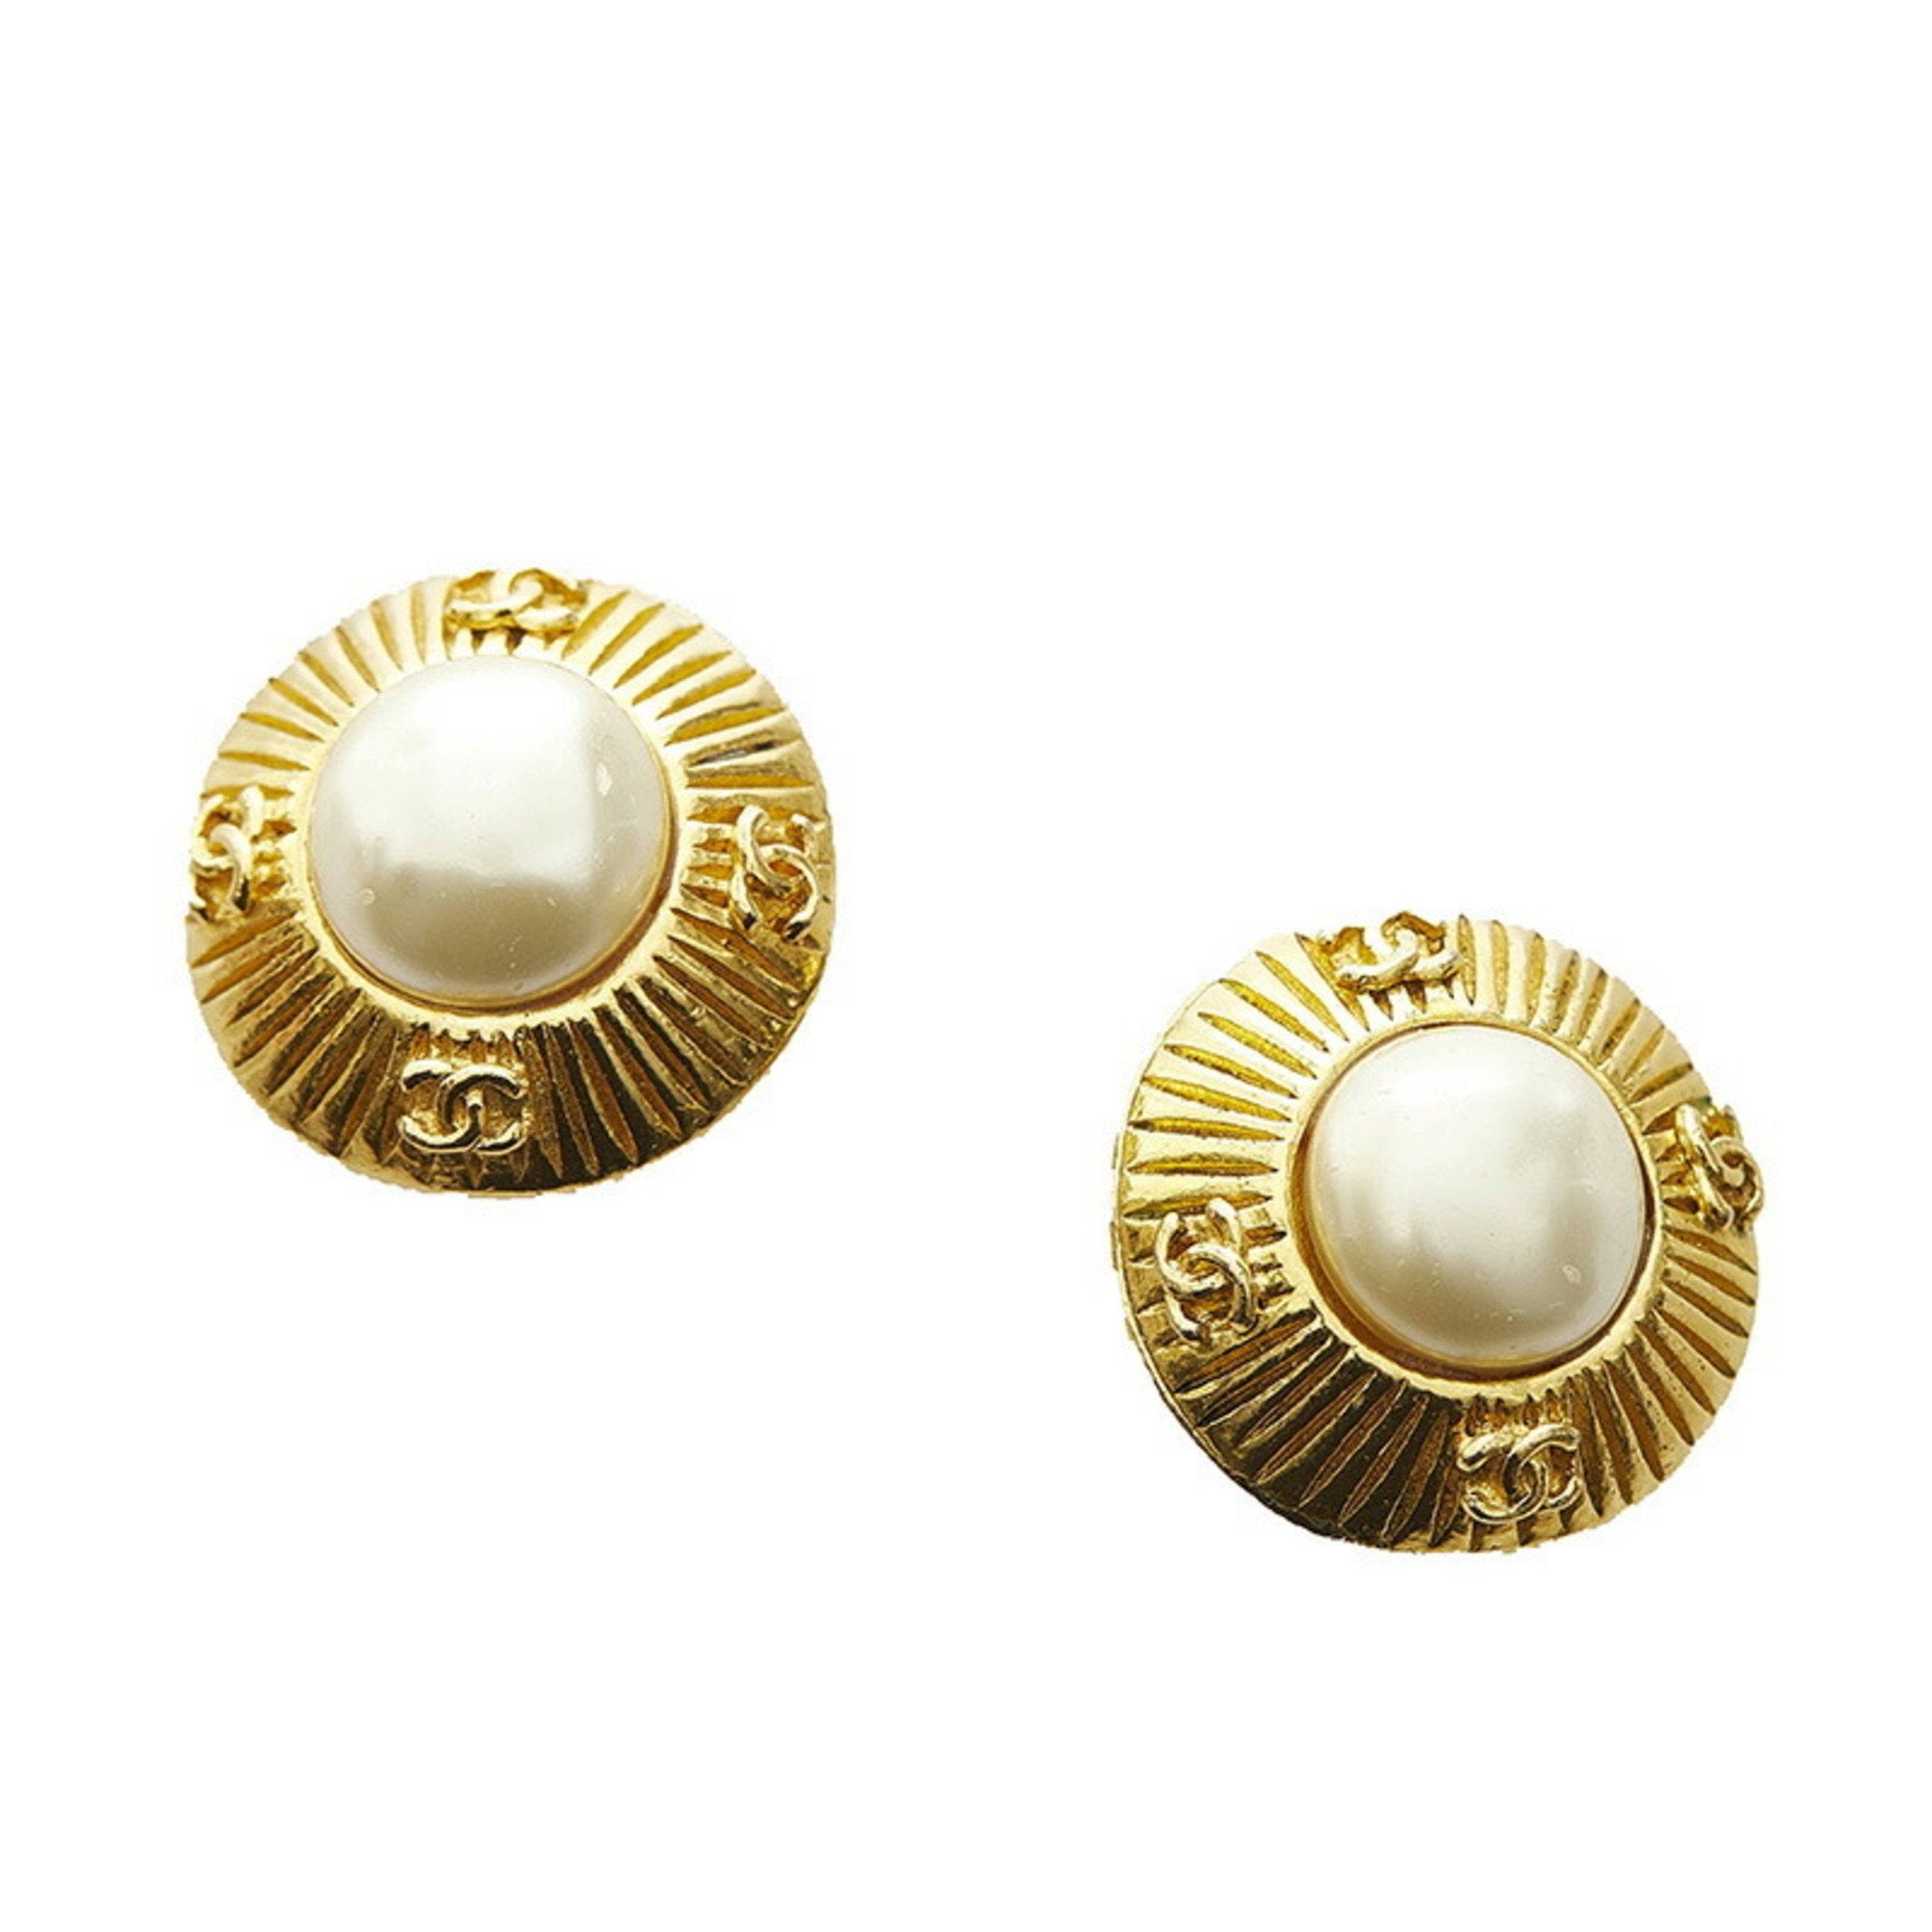 Chanel coco mark ear clip earrings gold plating ladies